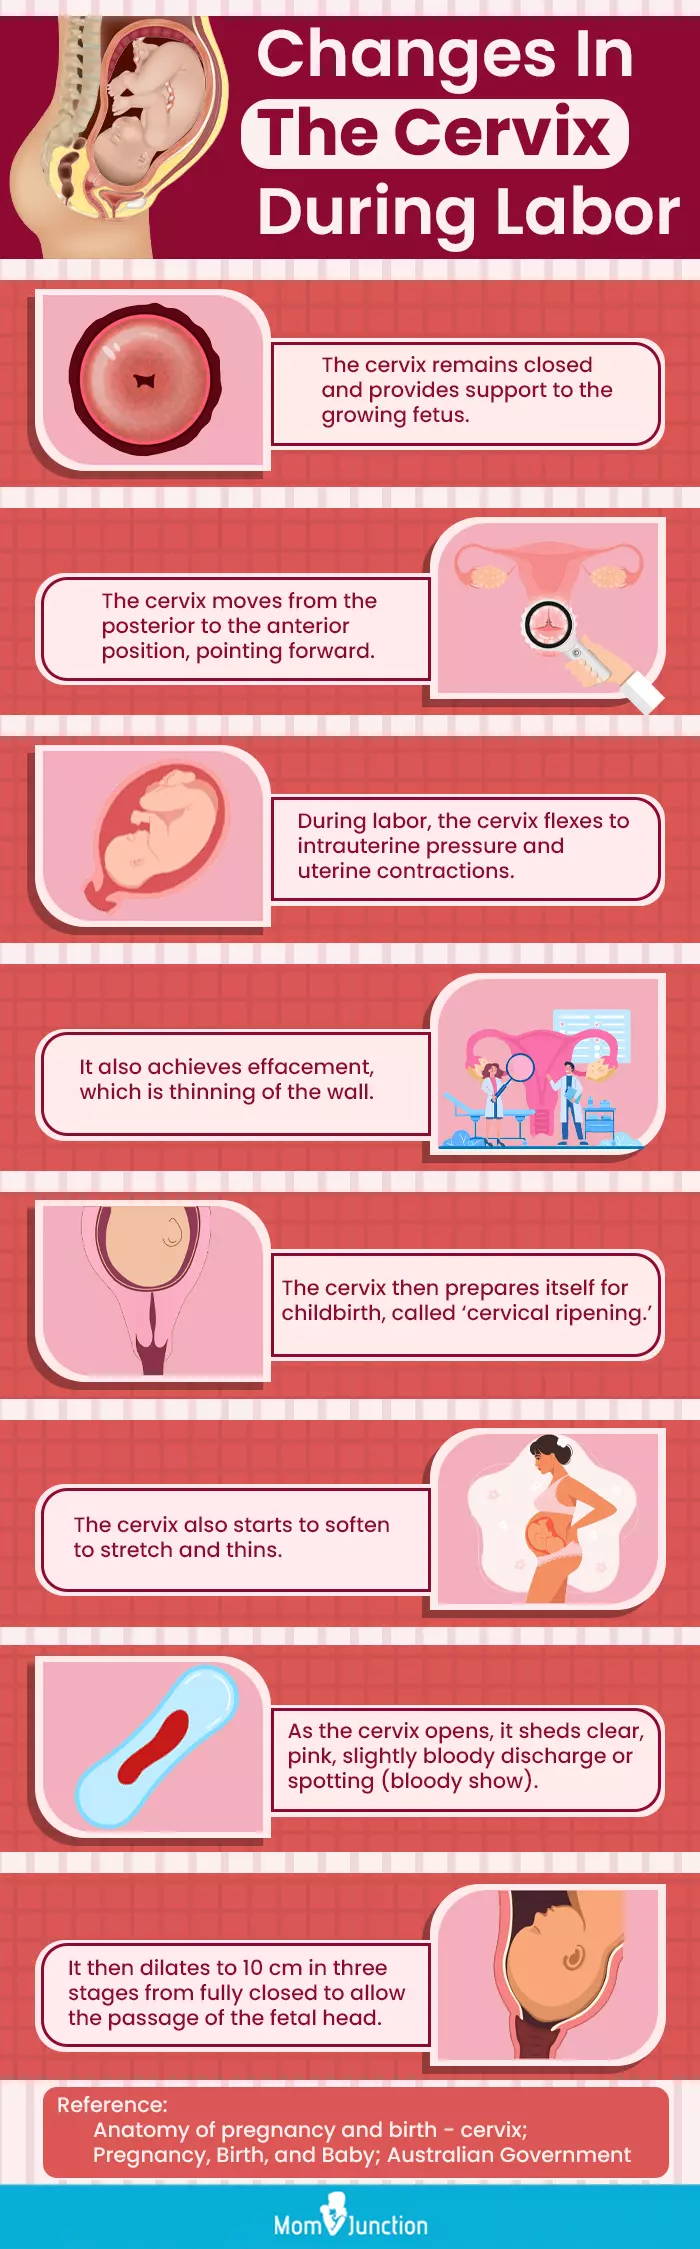 changes in the cervix during labor (infographic)